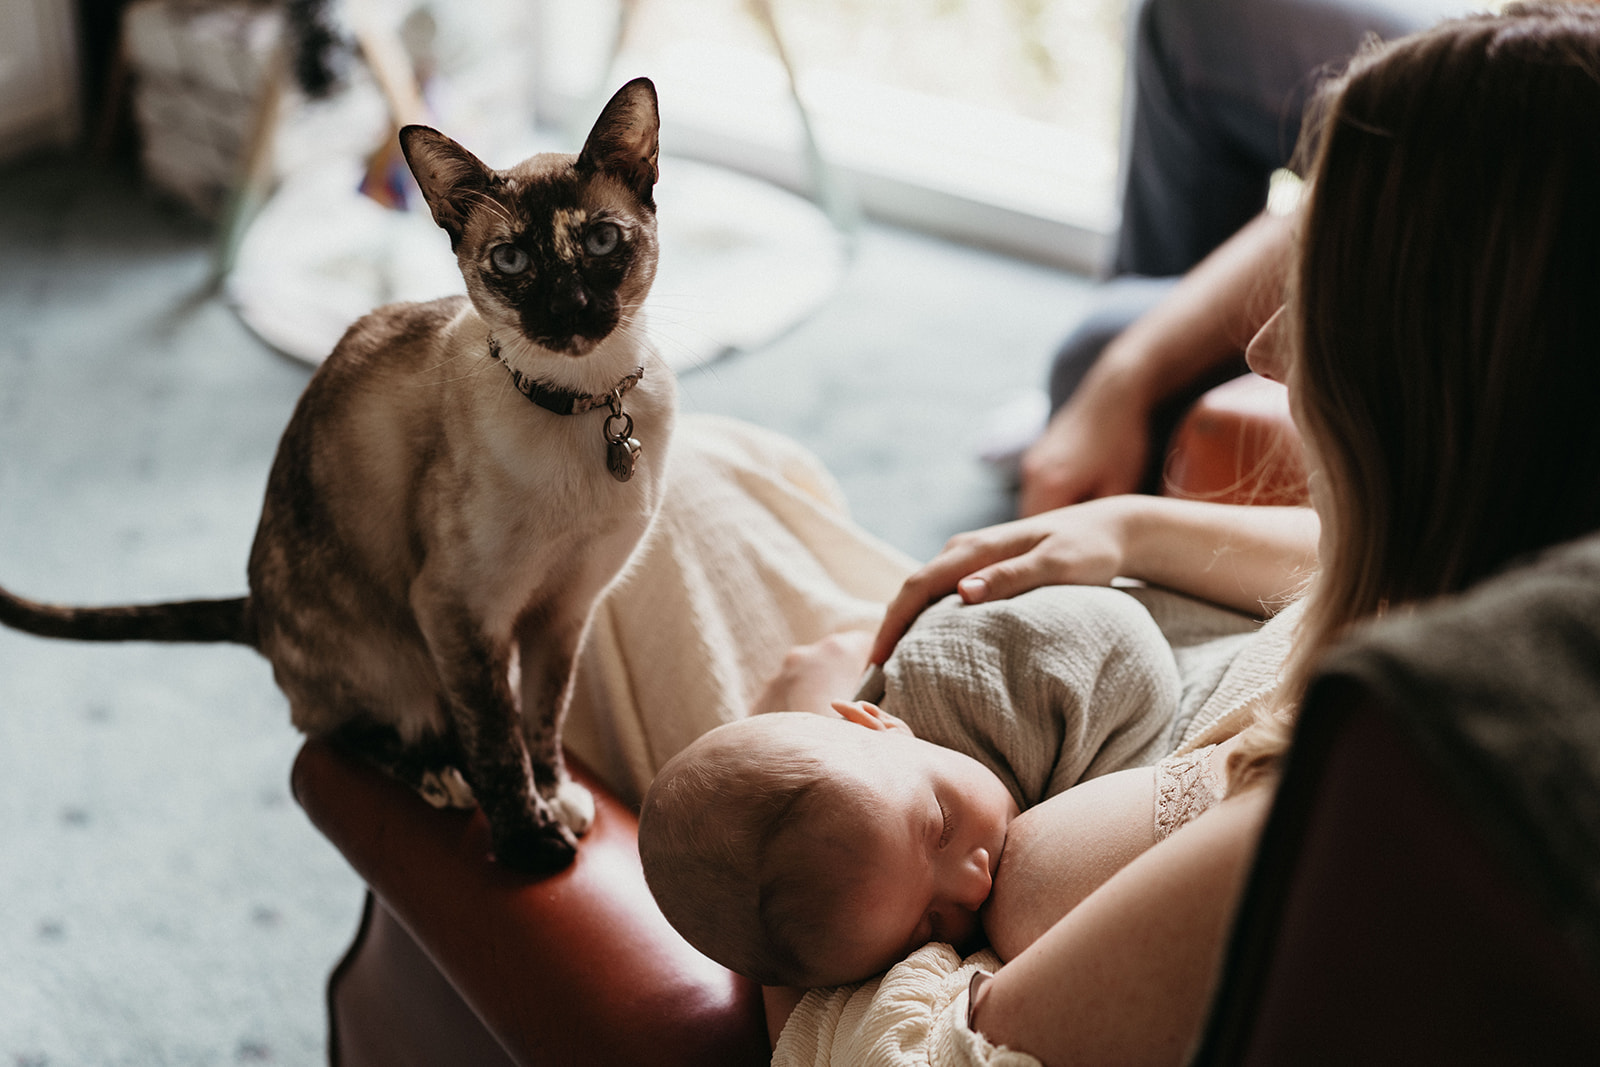 a cat looks up curiously as a mother breastfeeds her baby